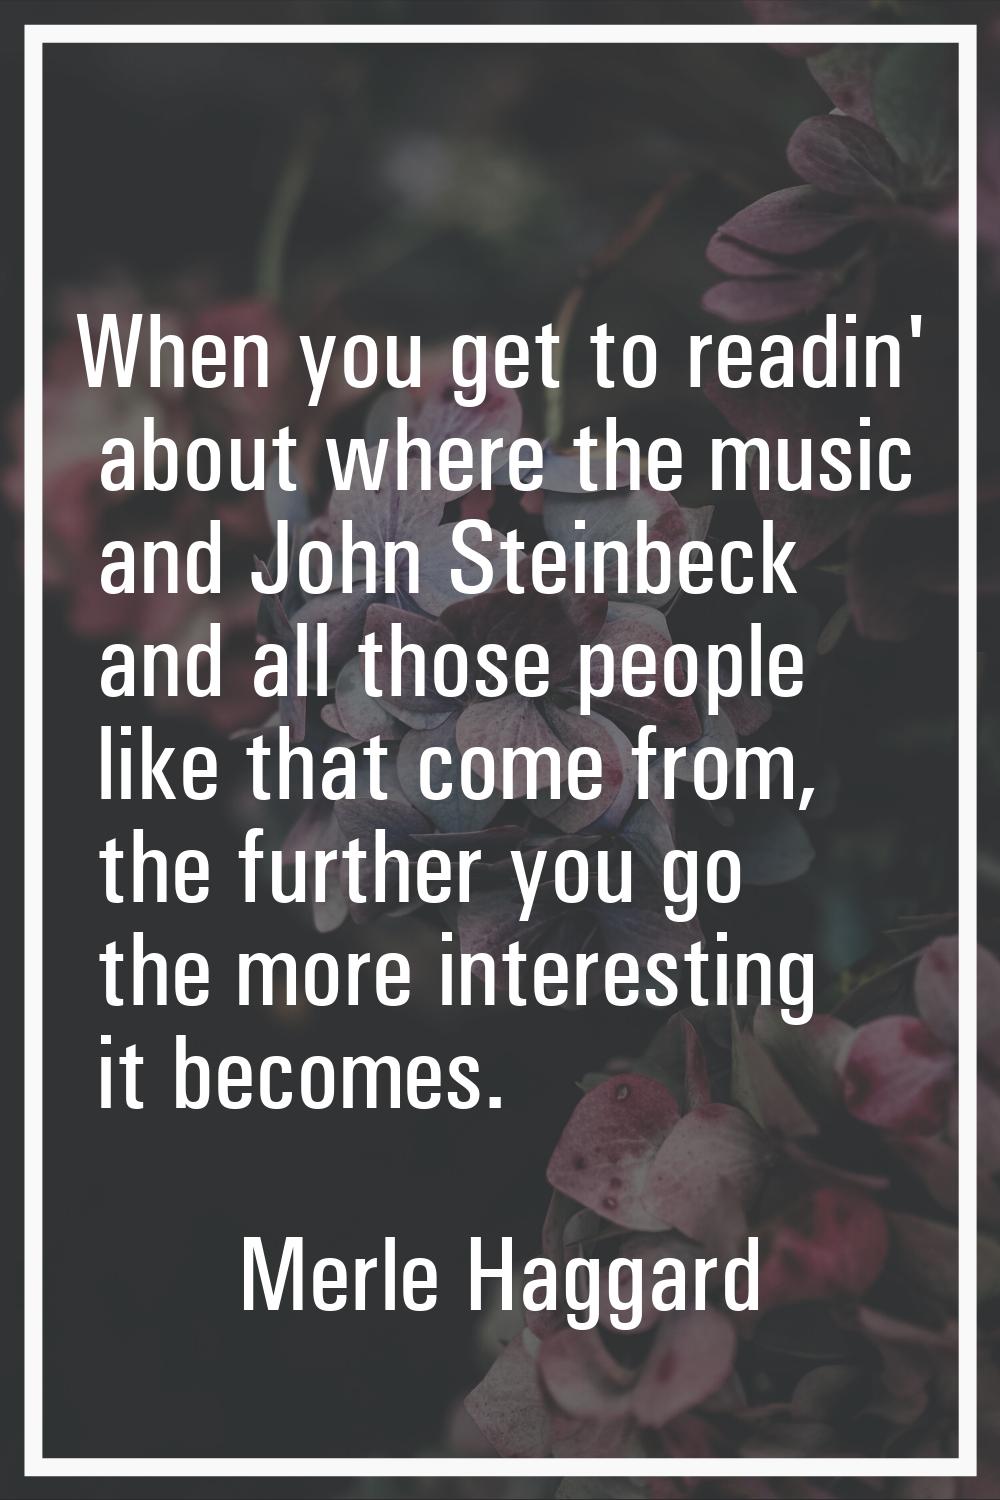 When you get to readin' about where the music and John Steinbeck and all those people like that com